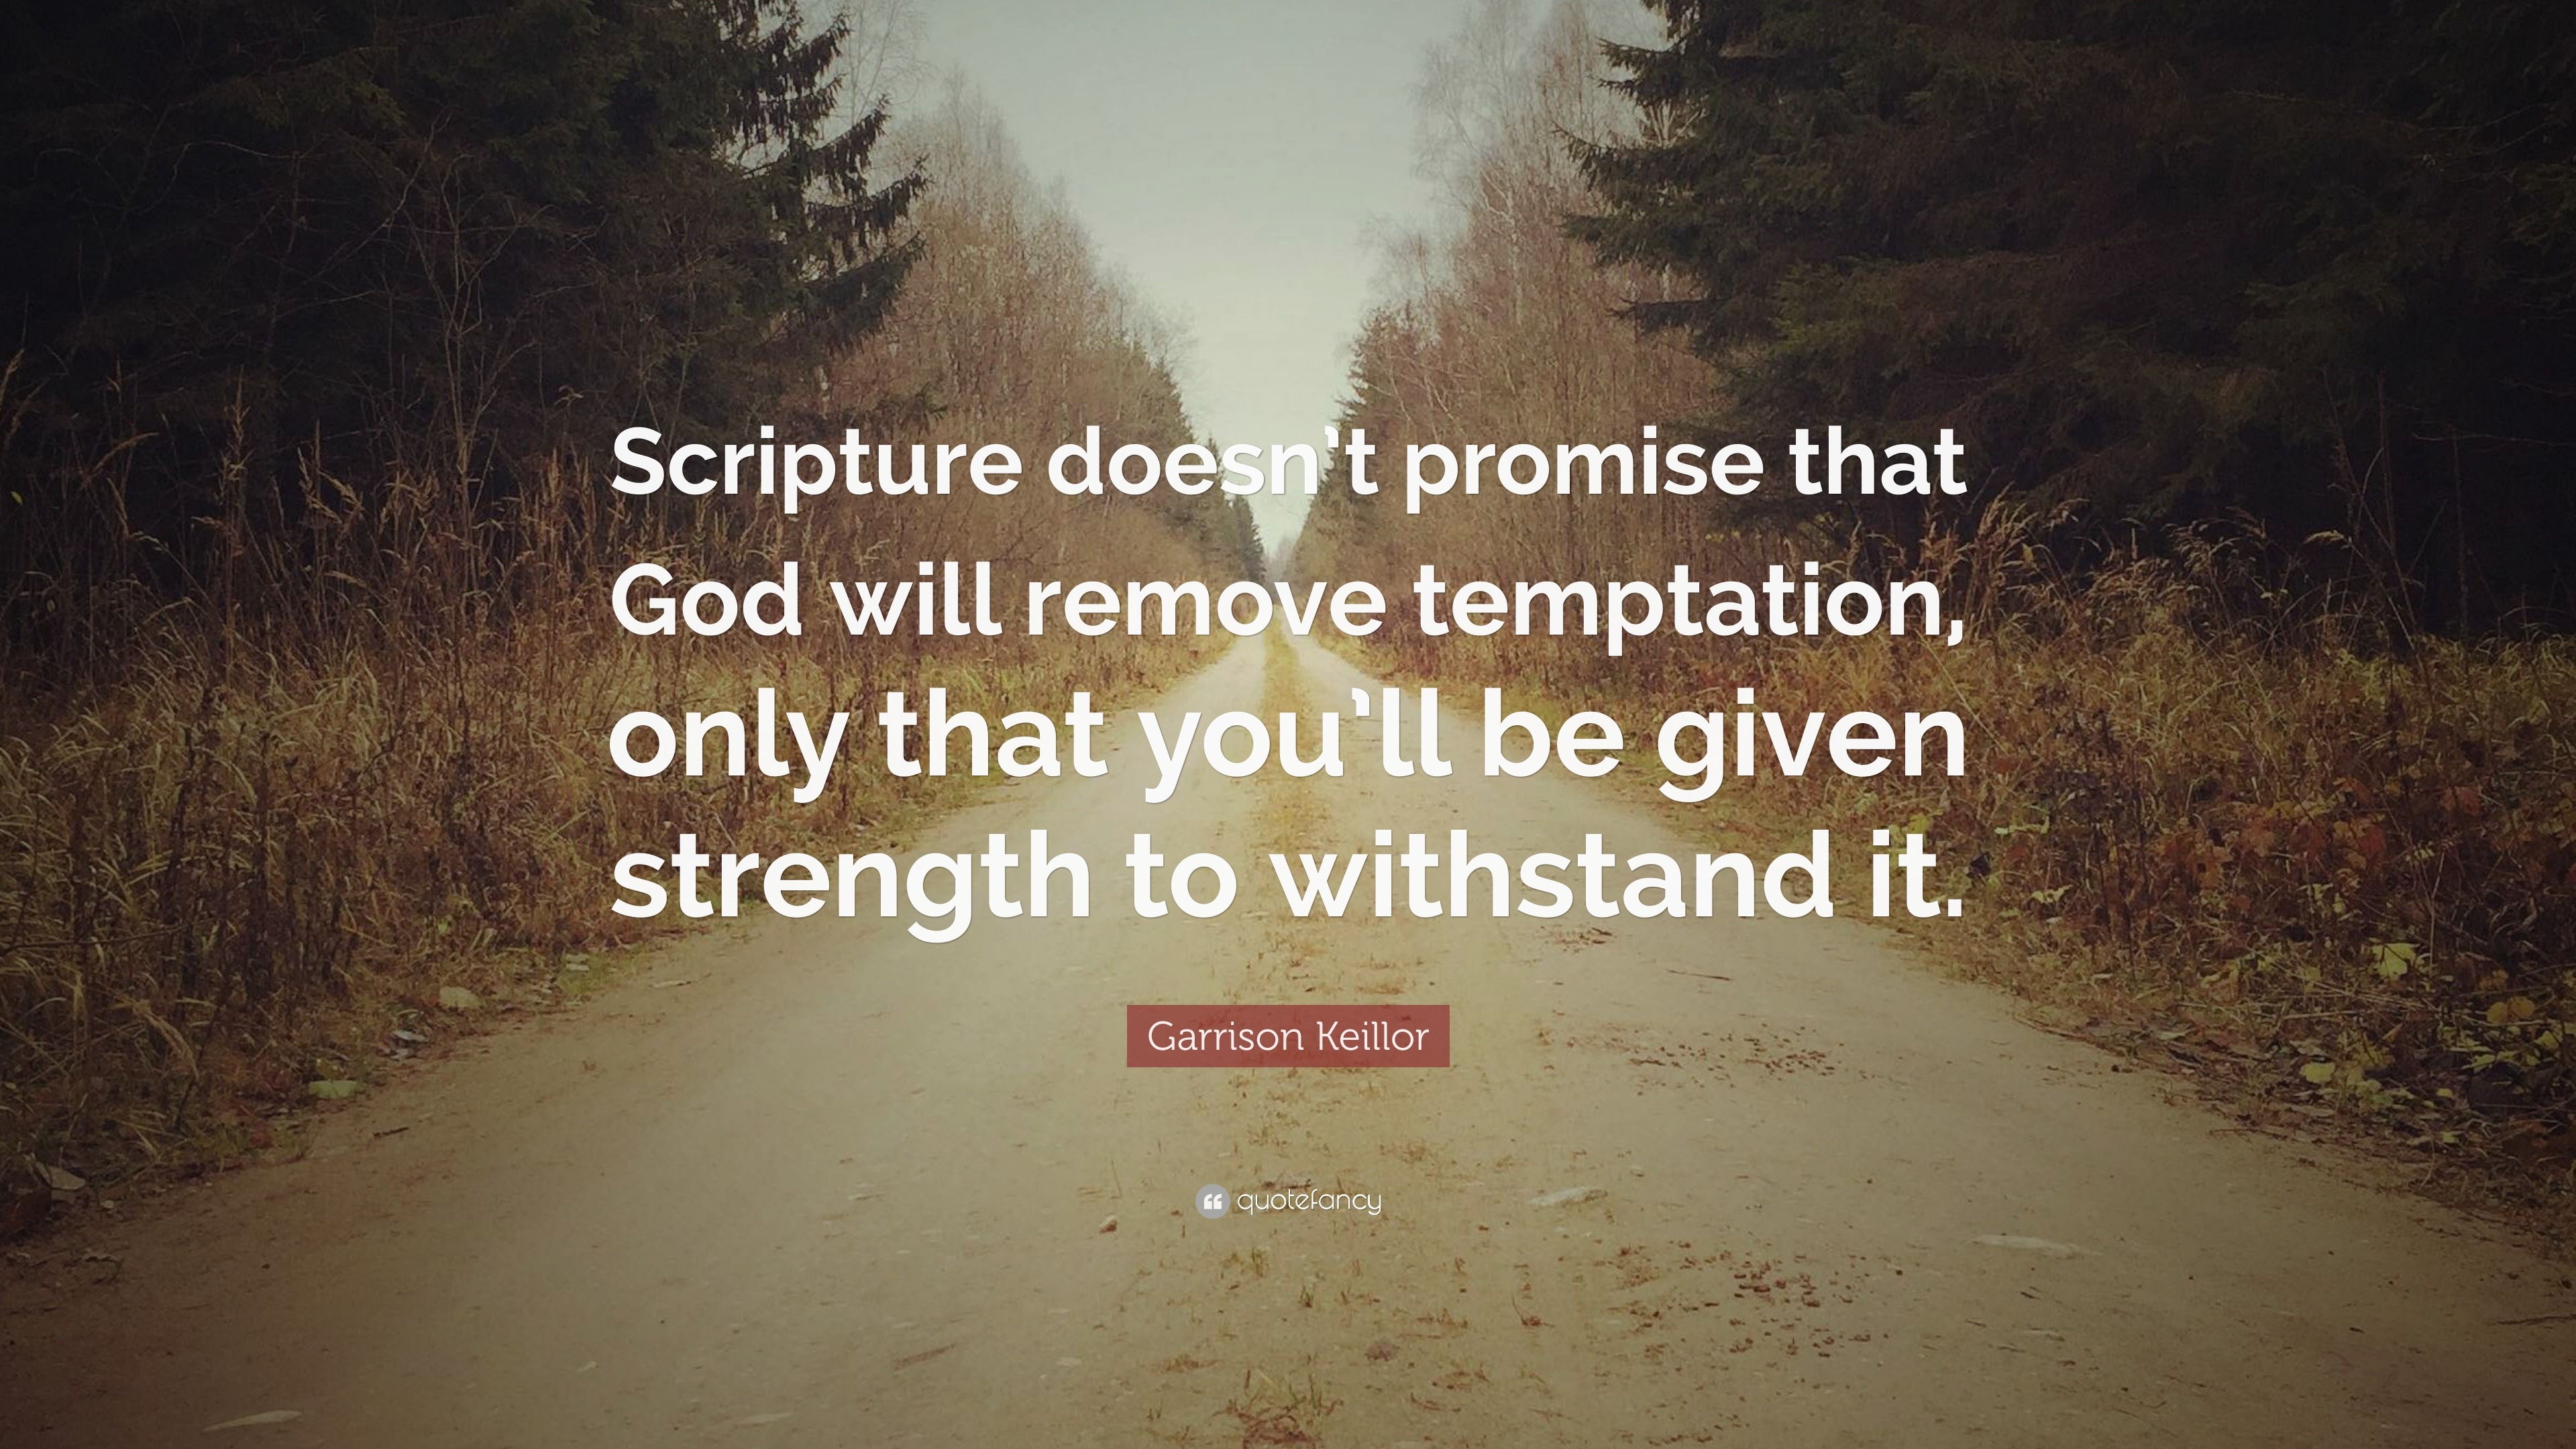 Garrison Keillor Quote: “Scripture doesn’t promise that God will remove